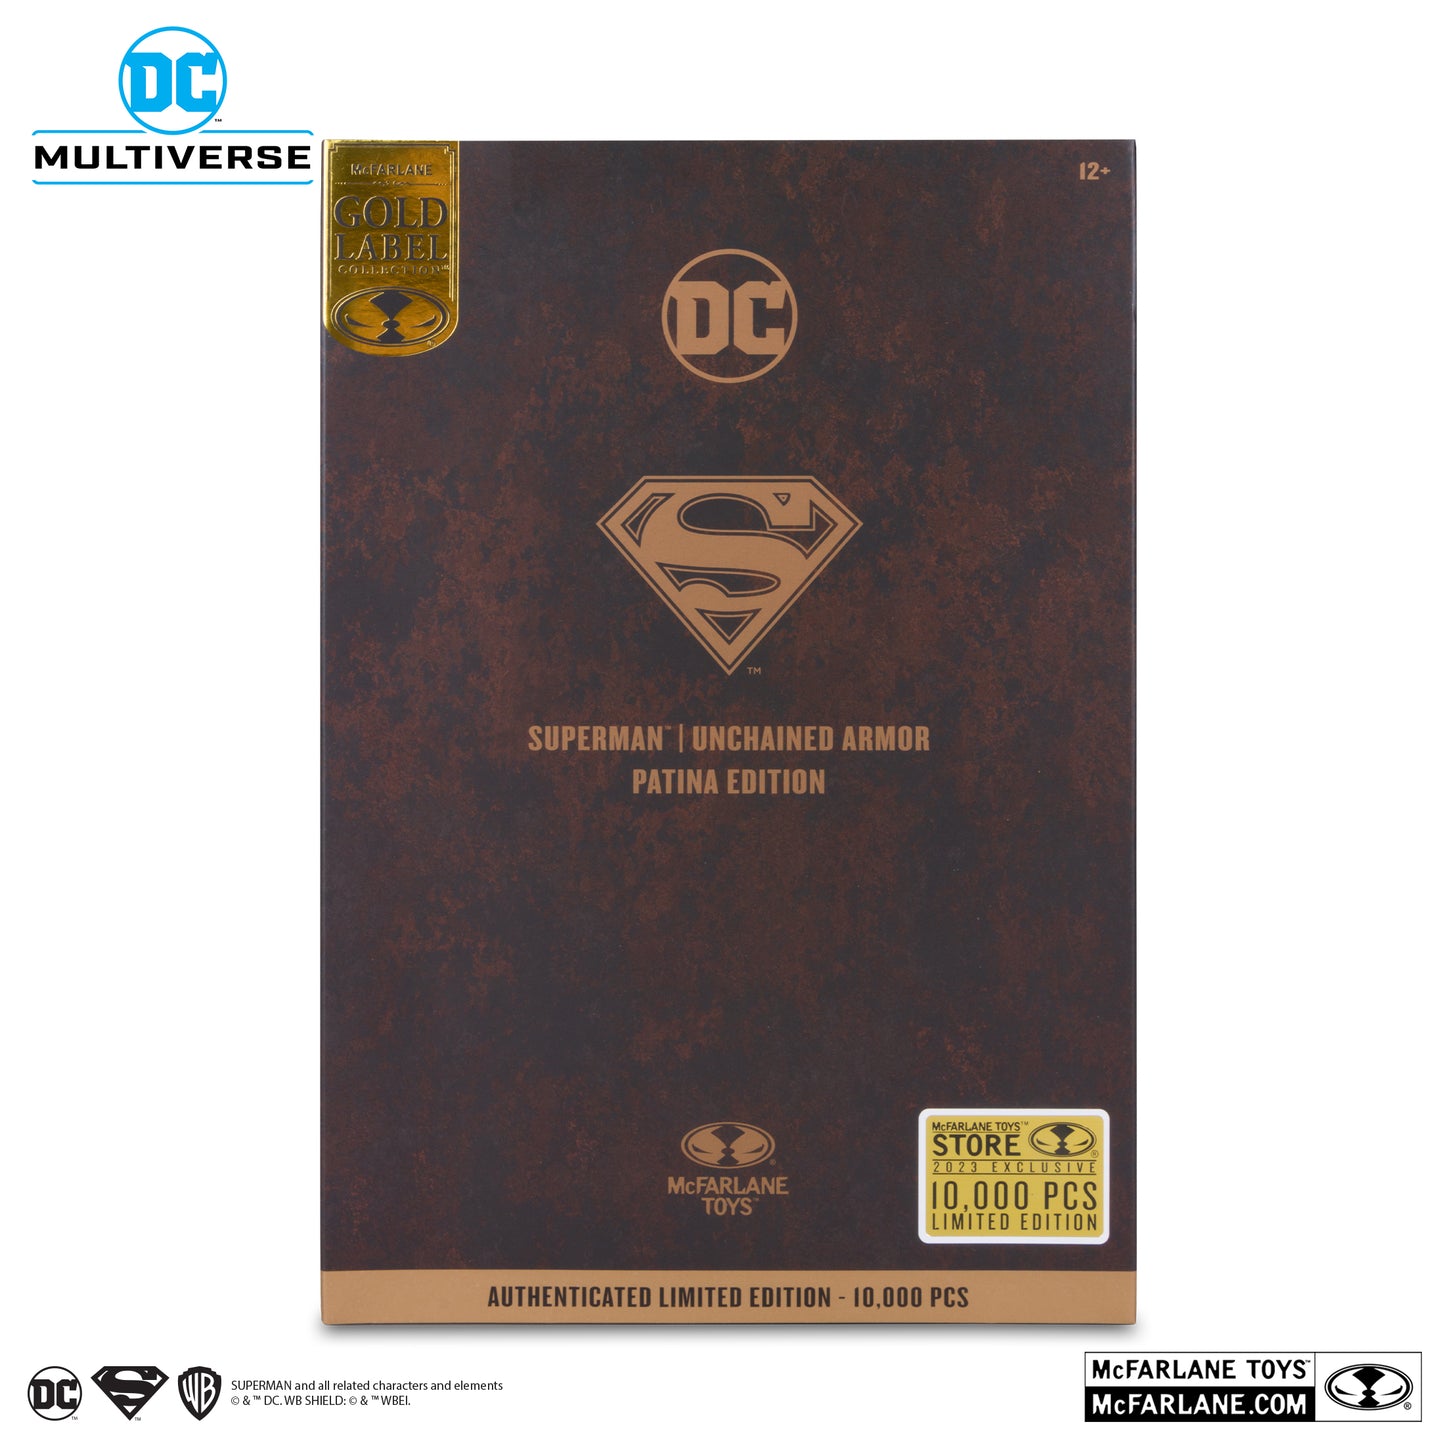 McFarlane Toys DC Multiverse - Superman Unchained Armor (Patina Edition) [Gold Label]